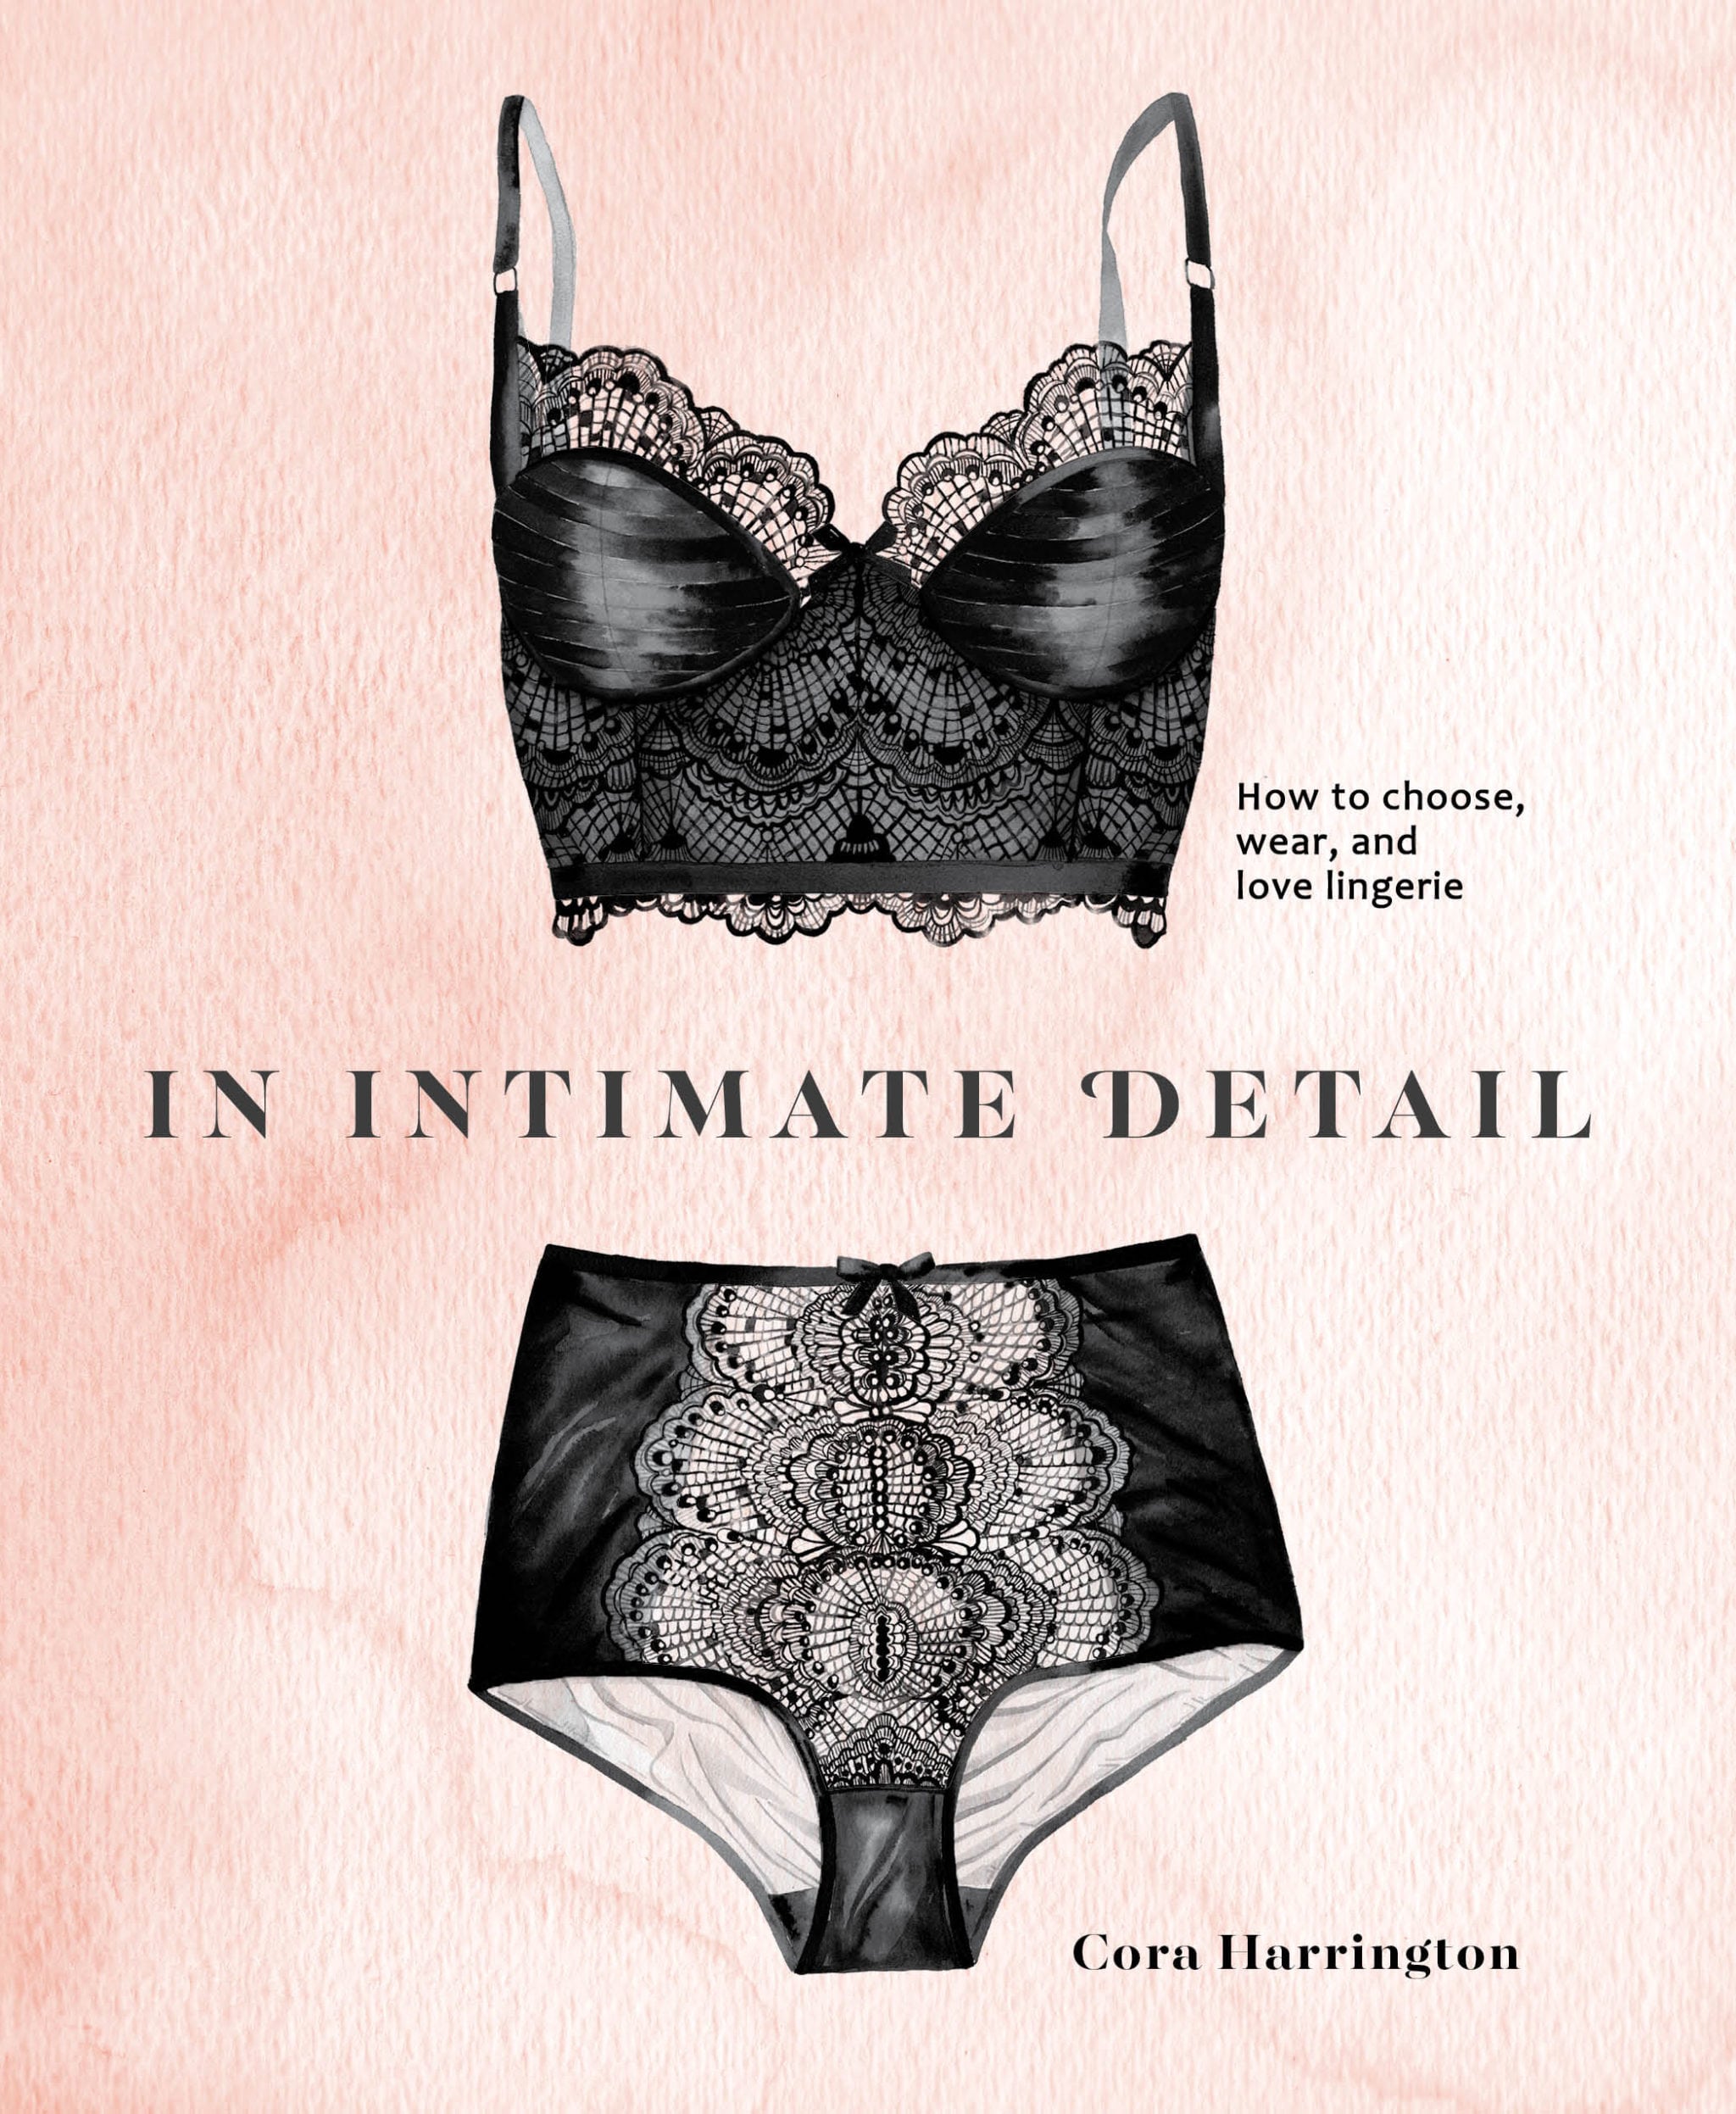 The cover of the book In Intimate Detail by Cora Harrington with a watercolor illustration of a black lace longline bra and coordinating high-waist brief on a pink background